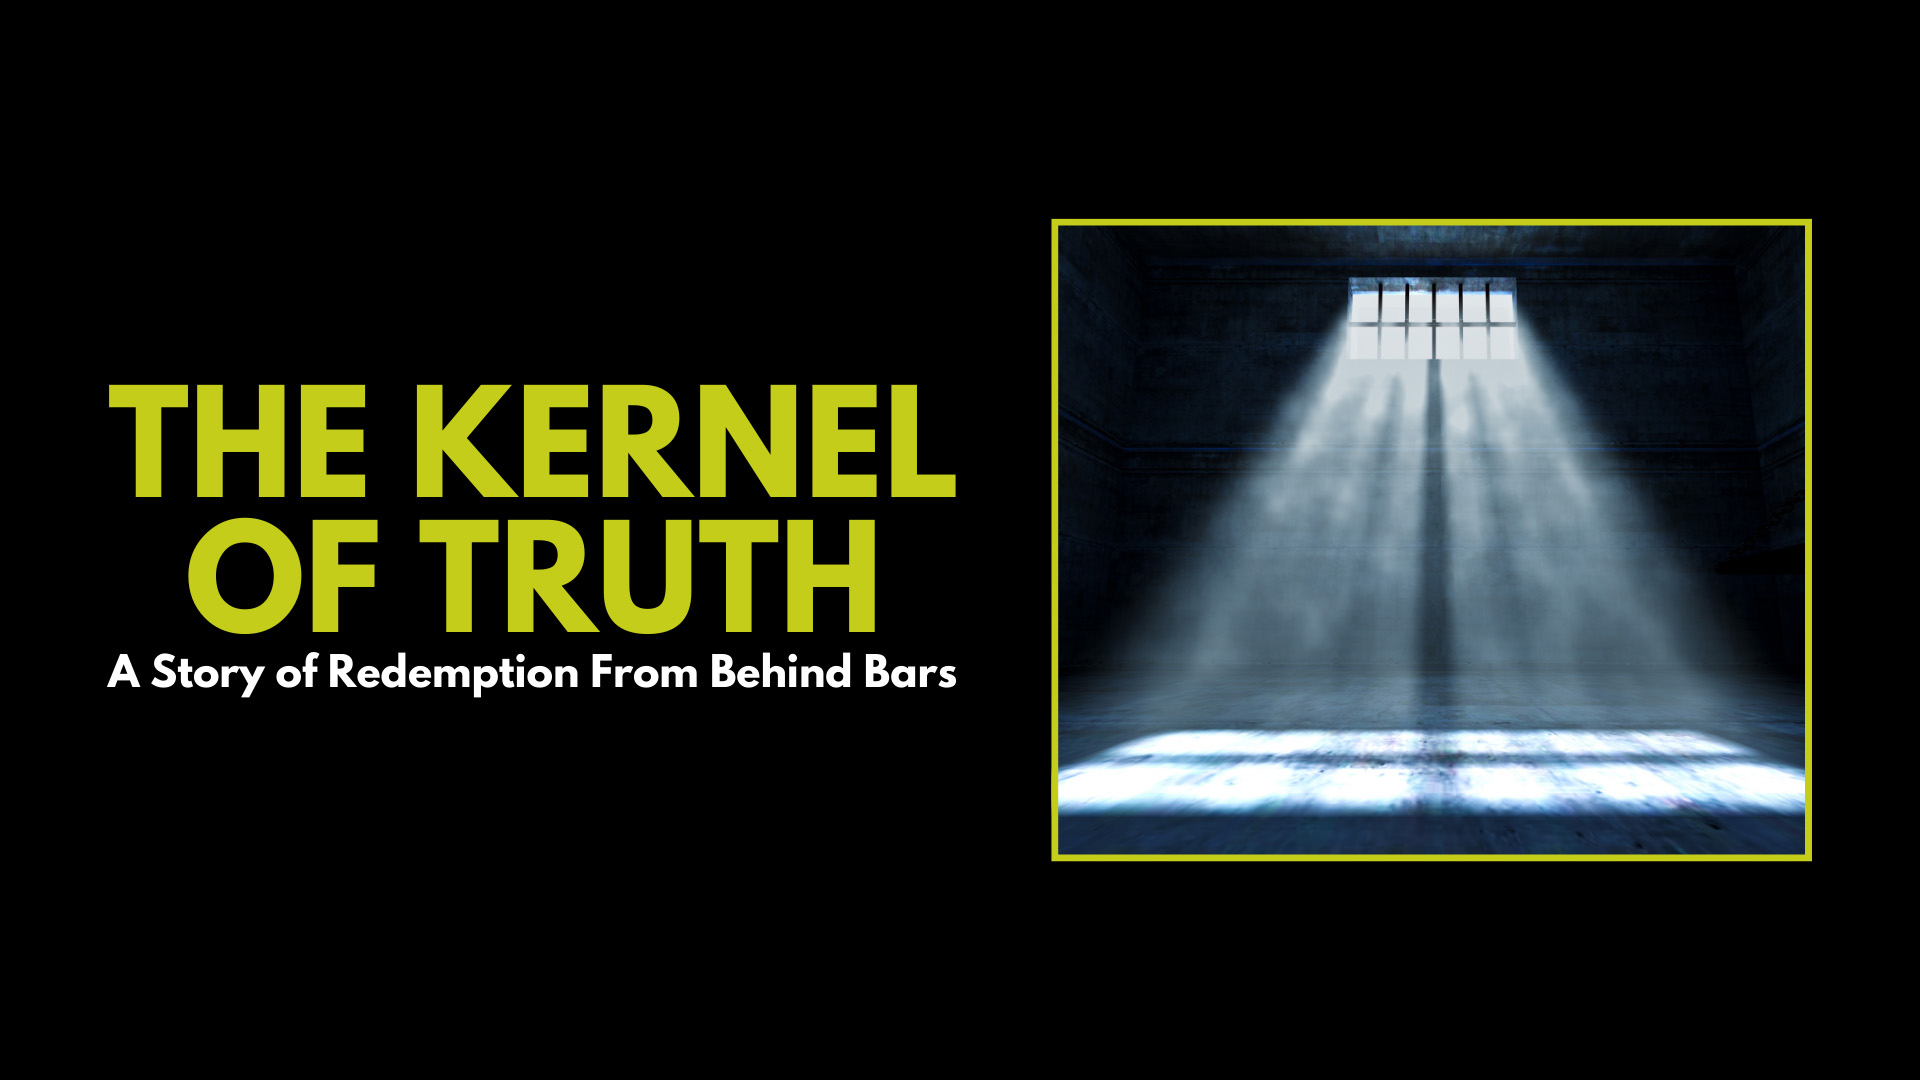 The Kernel of Truth